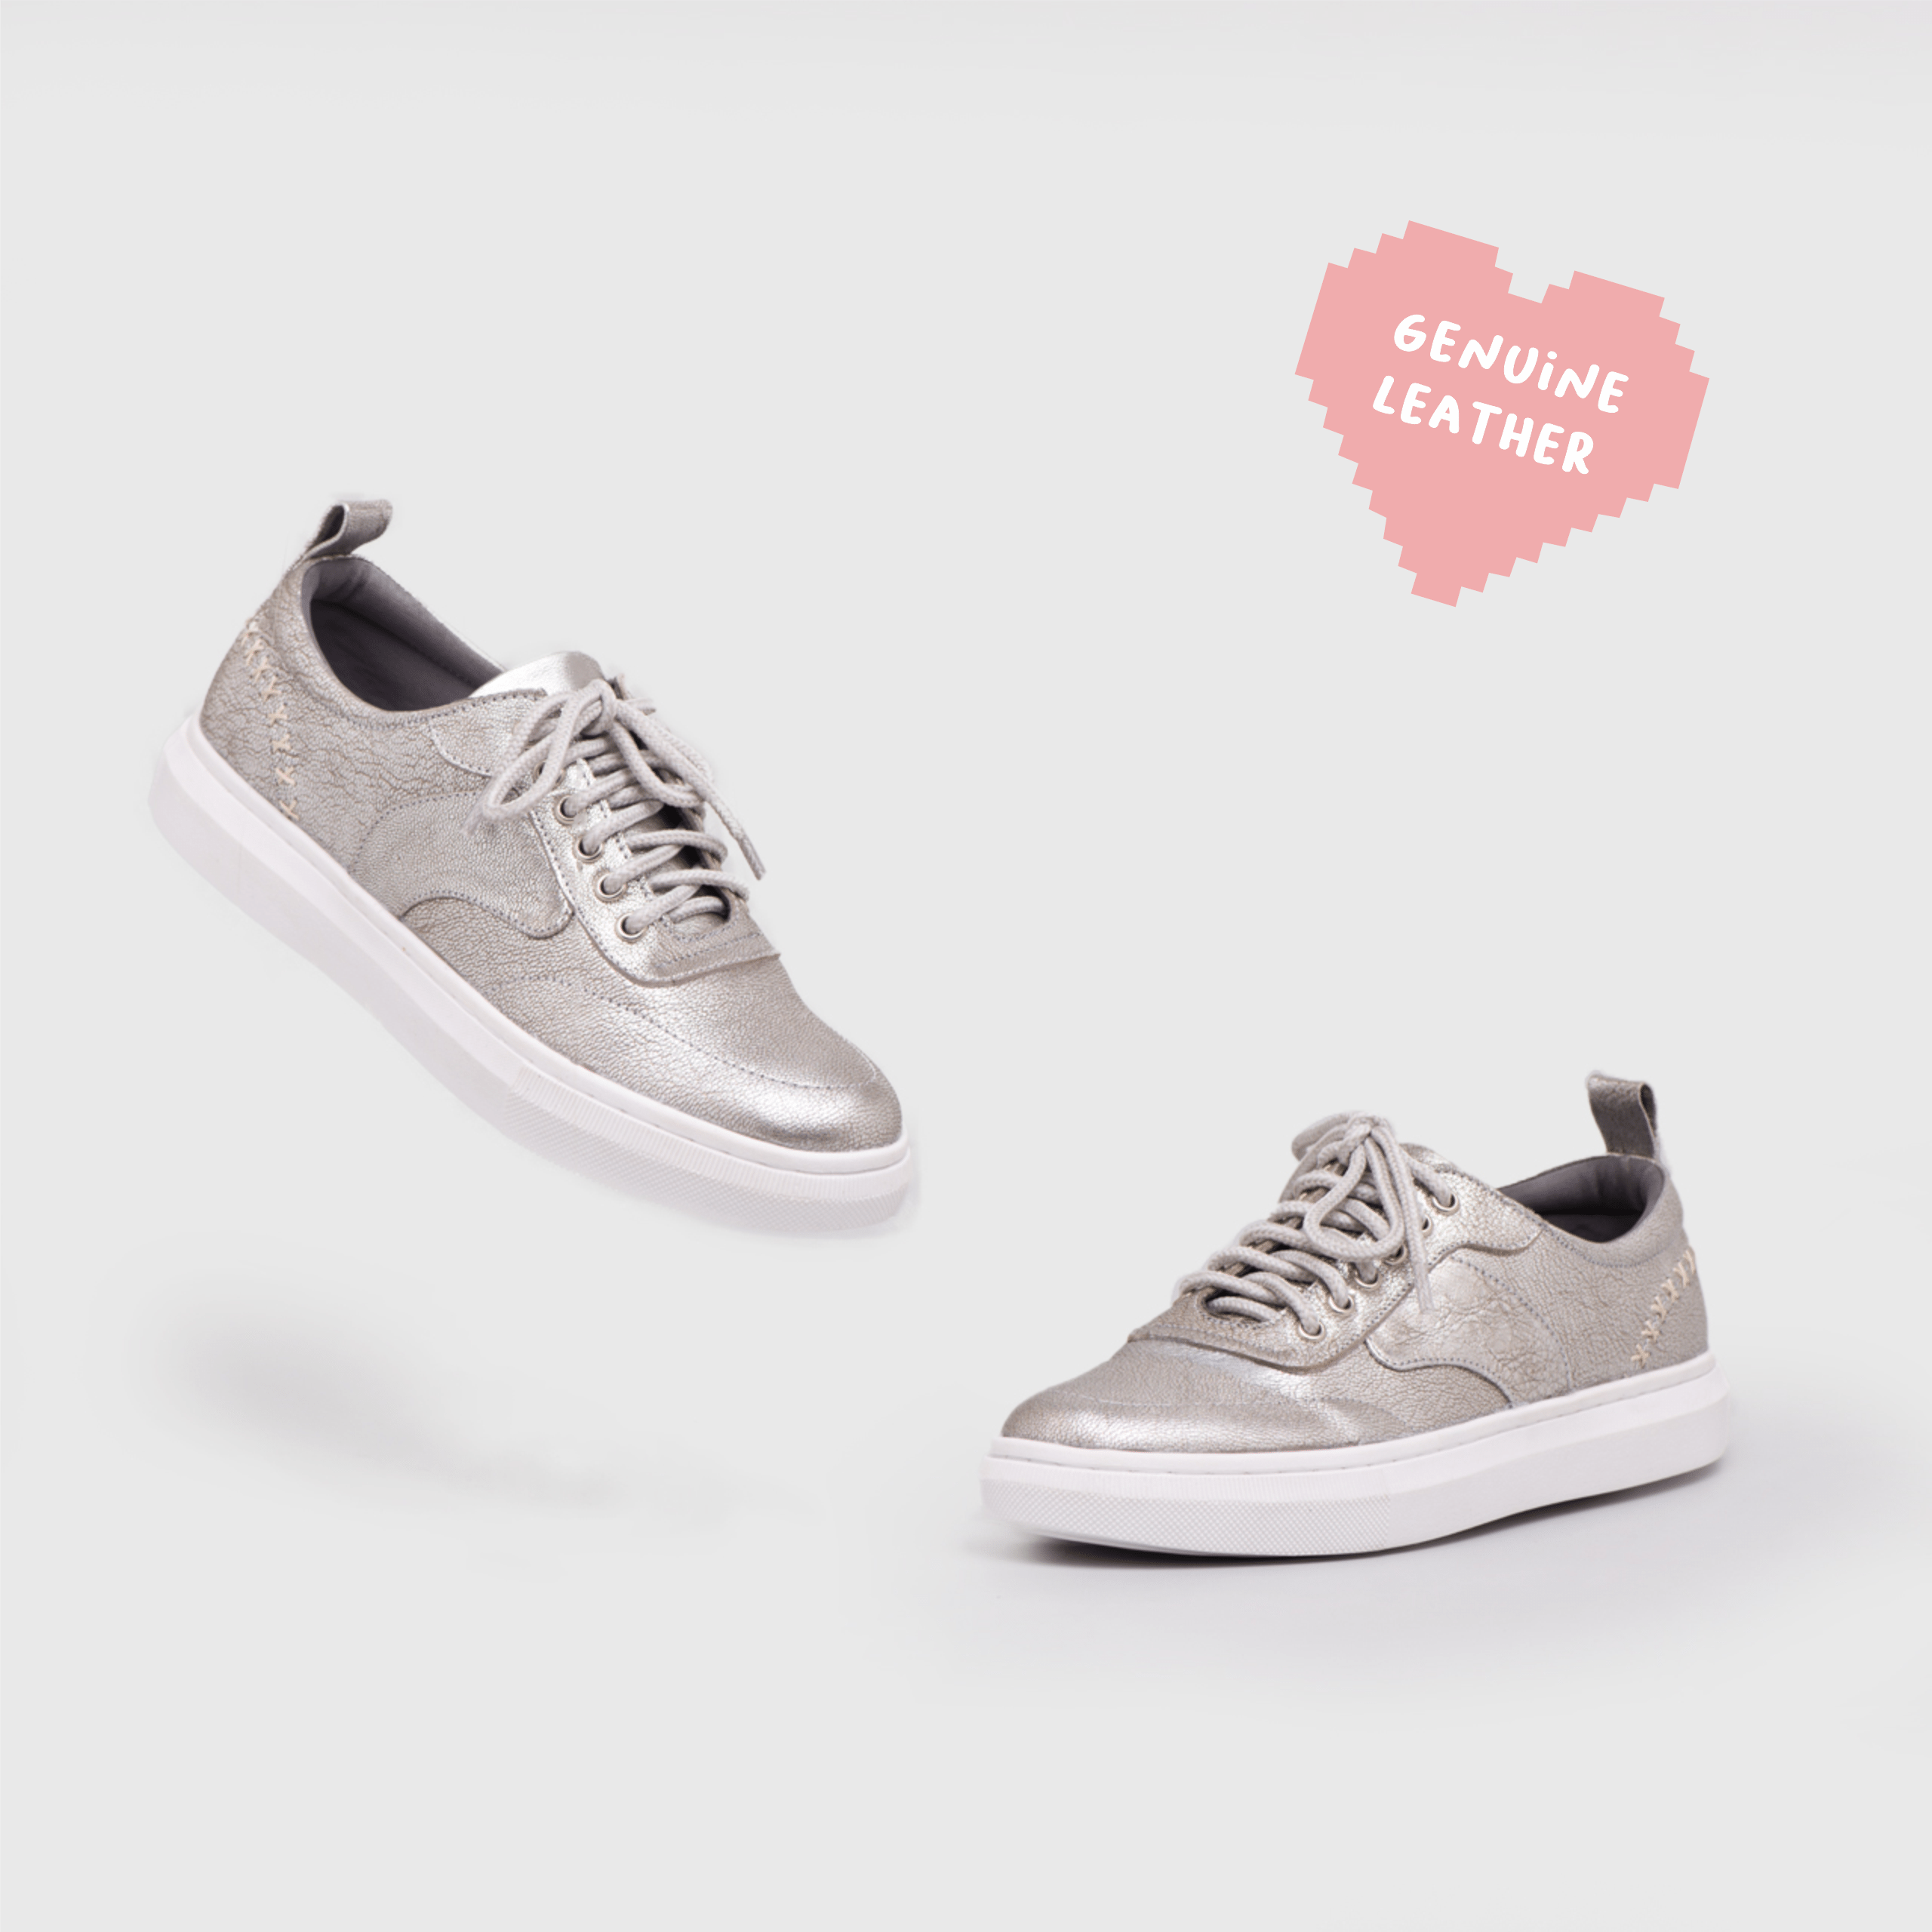 Adorable Projects Official Adorableprojects - Radinka Sneakers Genuine Leather Silver